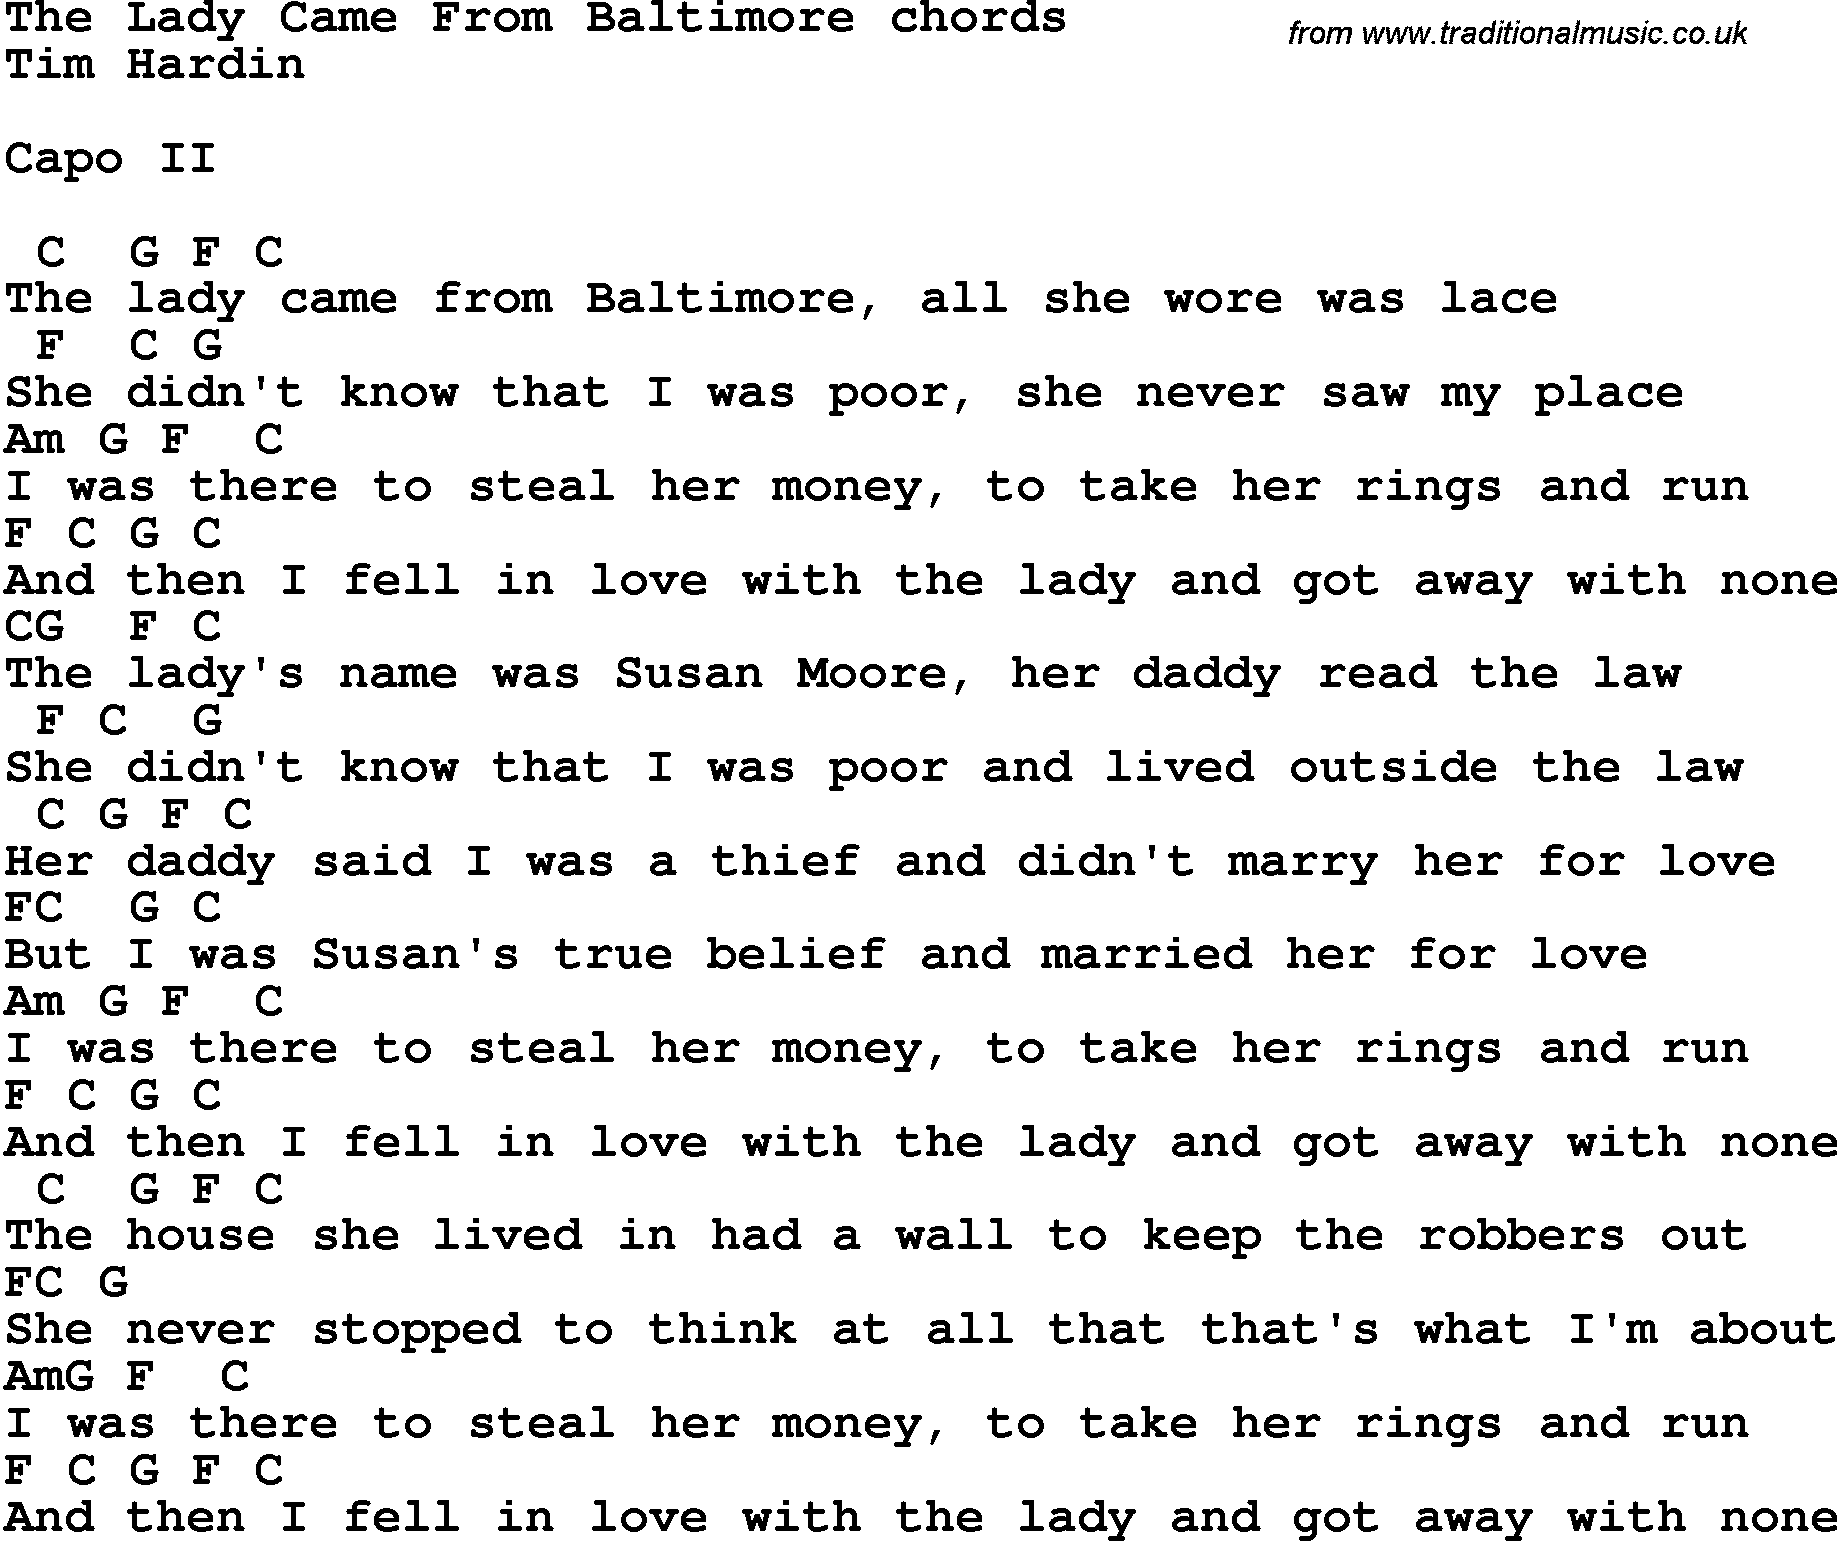 Song Lyrics with guitar chords for The Lady Came From Baltimore